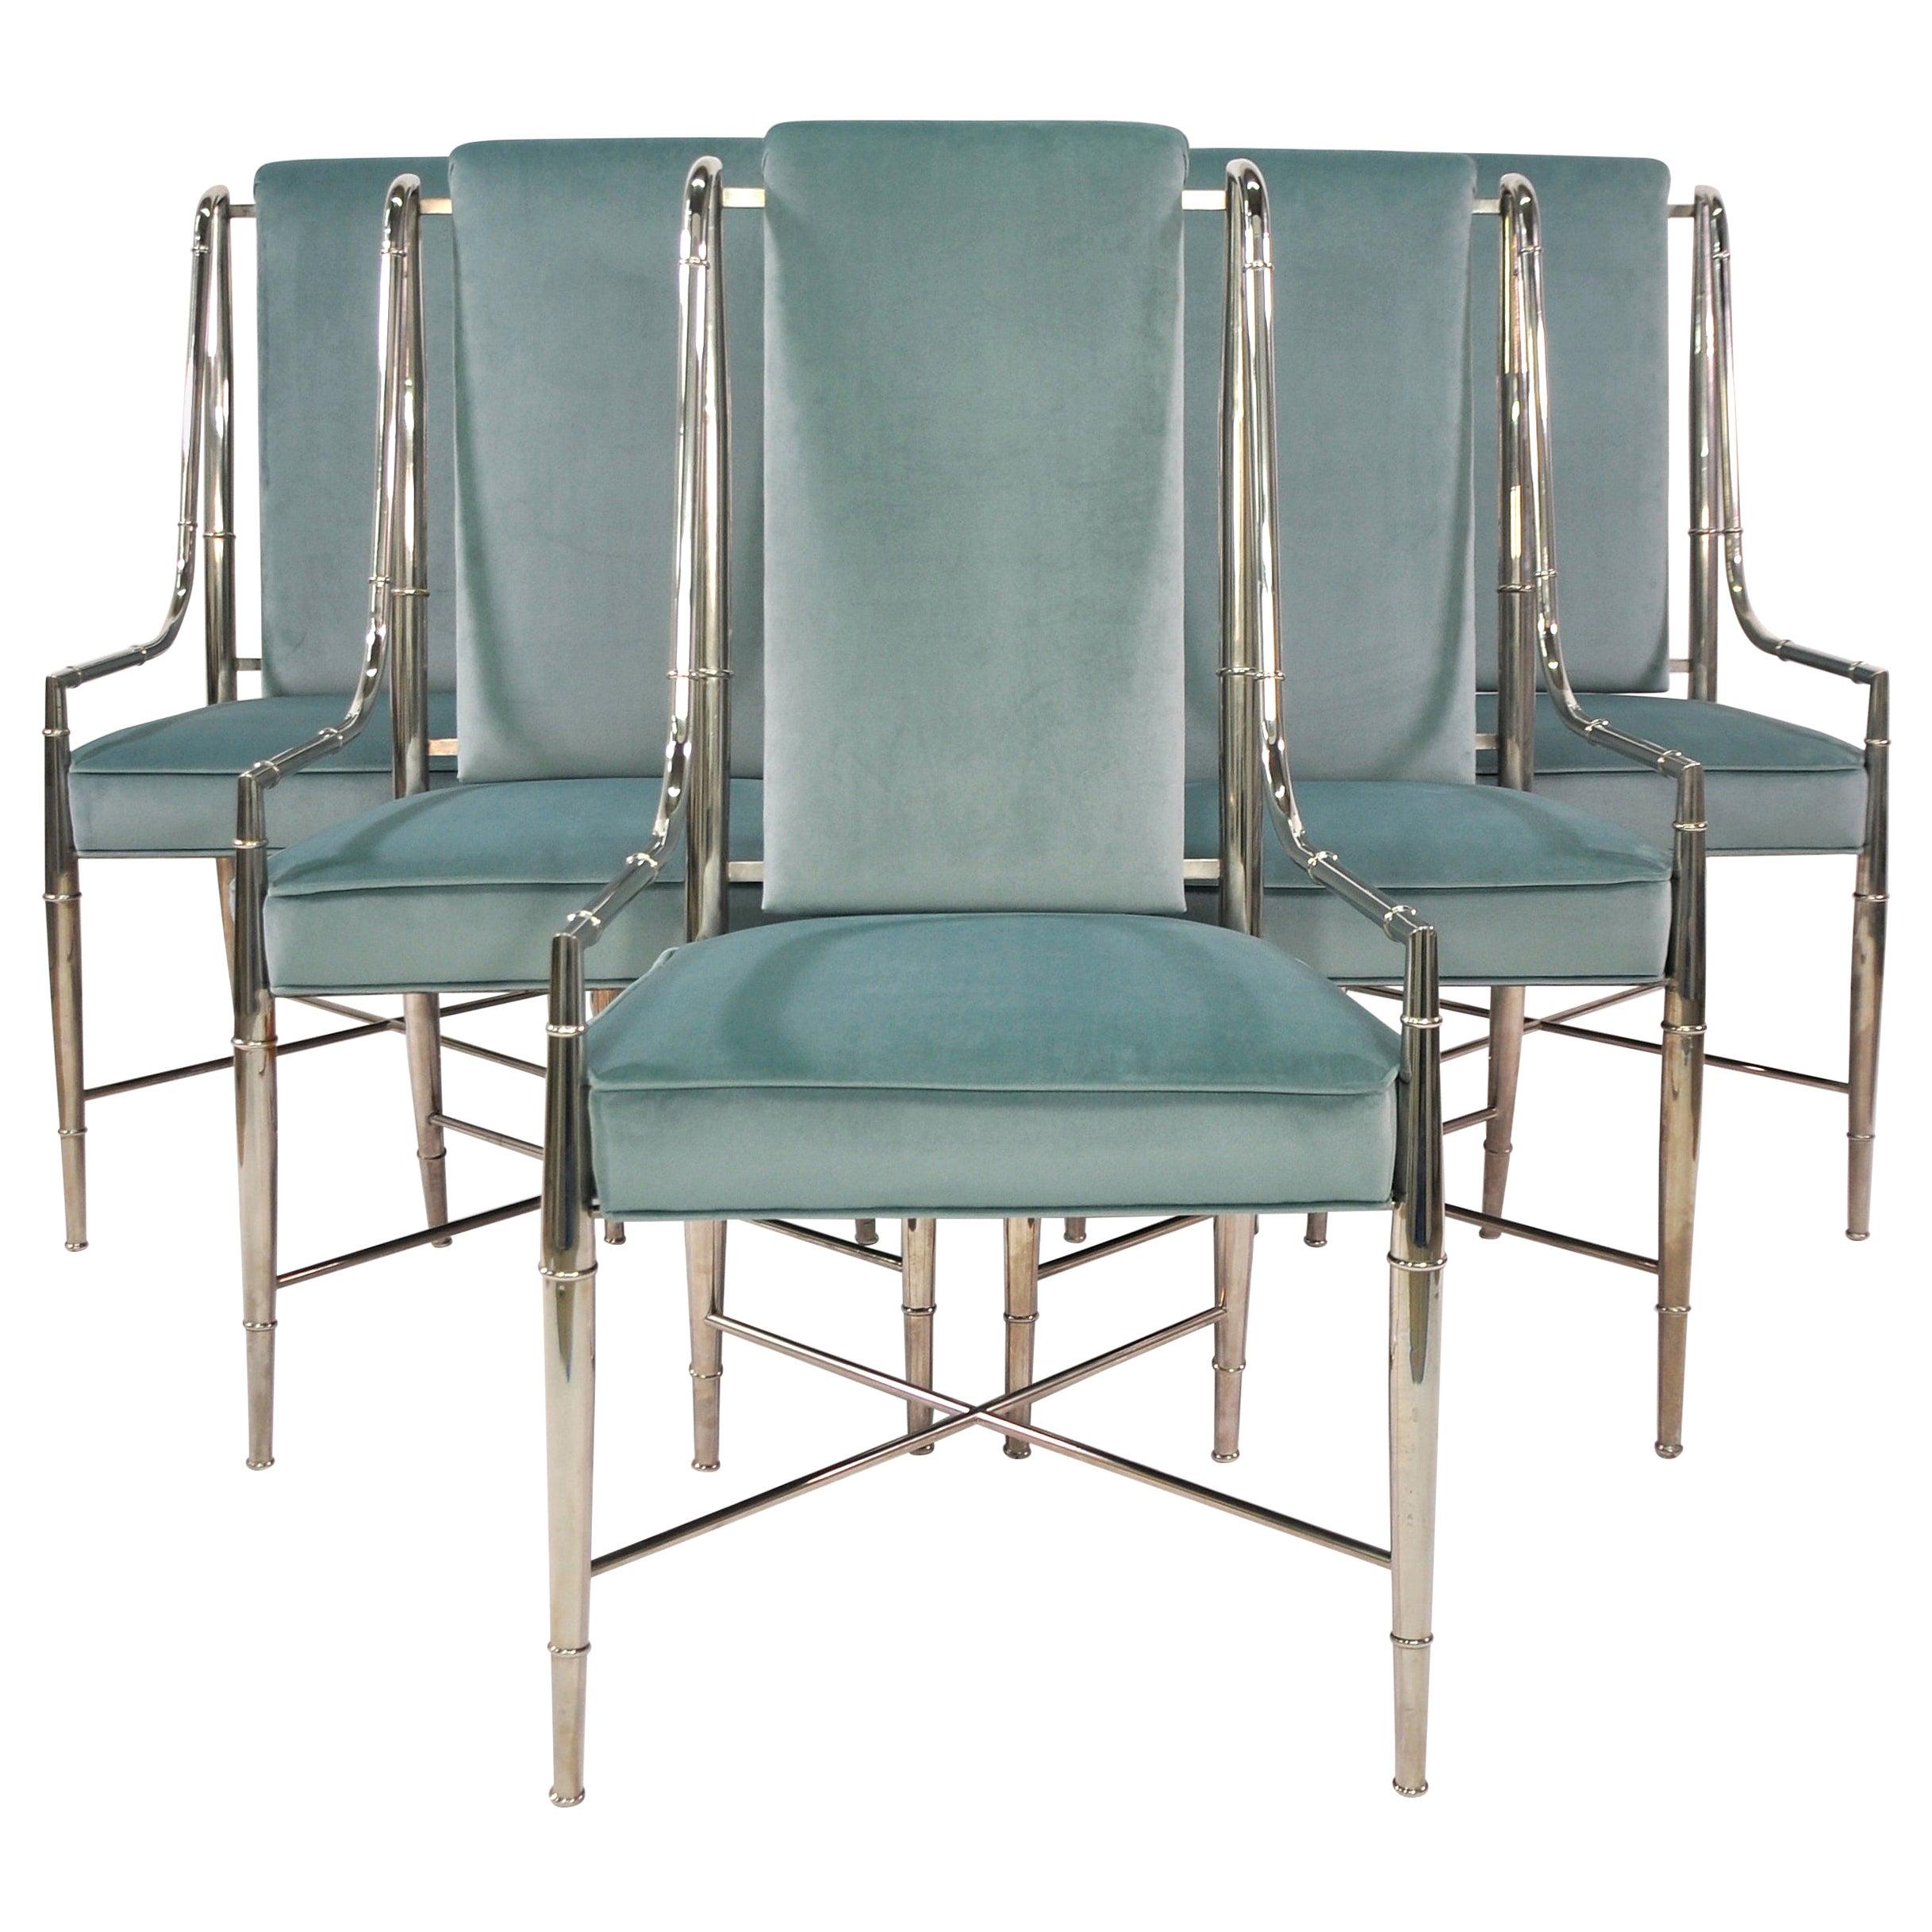 Truly incredible craftsmanship in these rare Mid-Century Modern faux bamboo Mastercraft armchairs by Weiman/Warren Lloyd, made in Italy, circa 1975. From a rare series known as the Imperial chair, these vintage chairs feature an even rarer custom